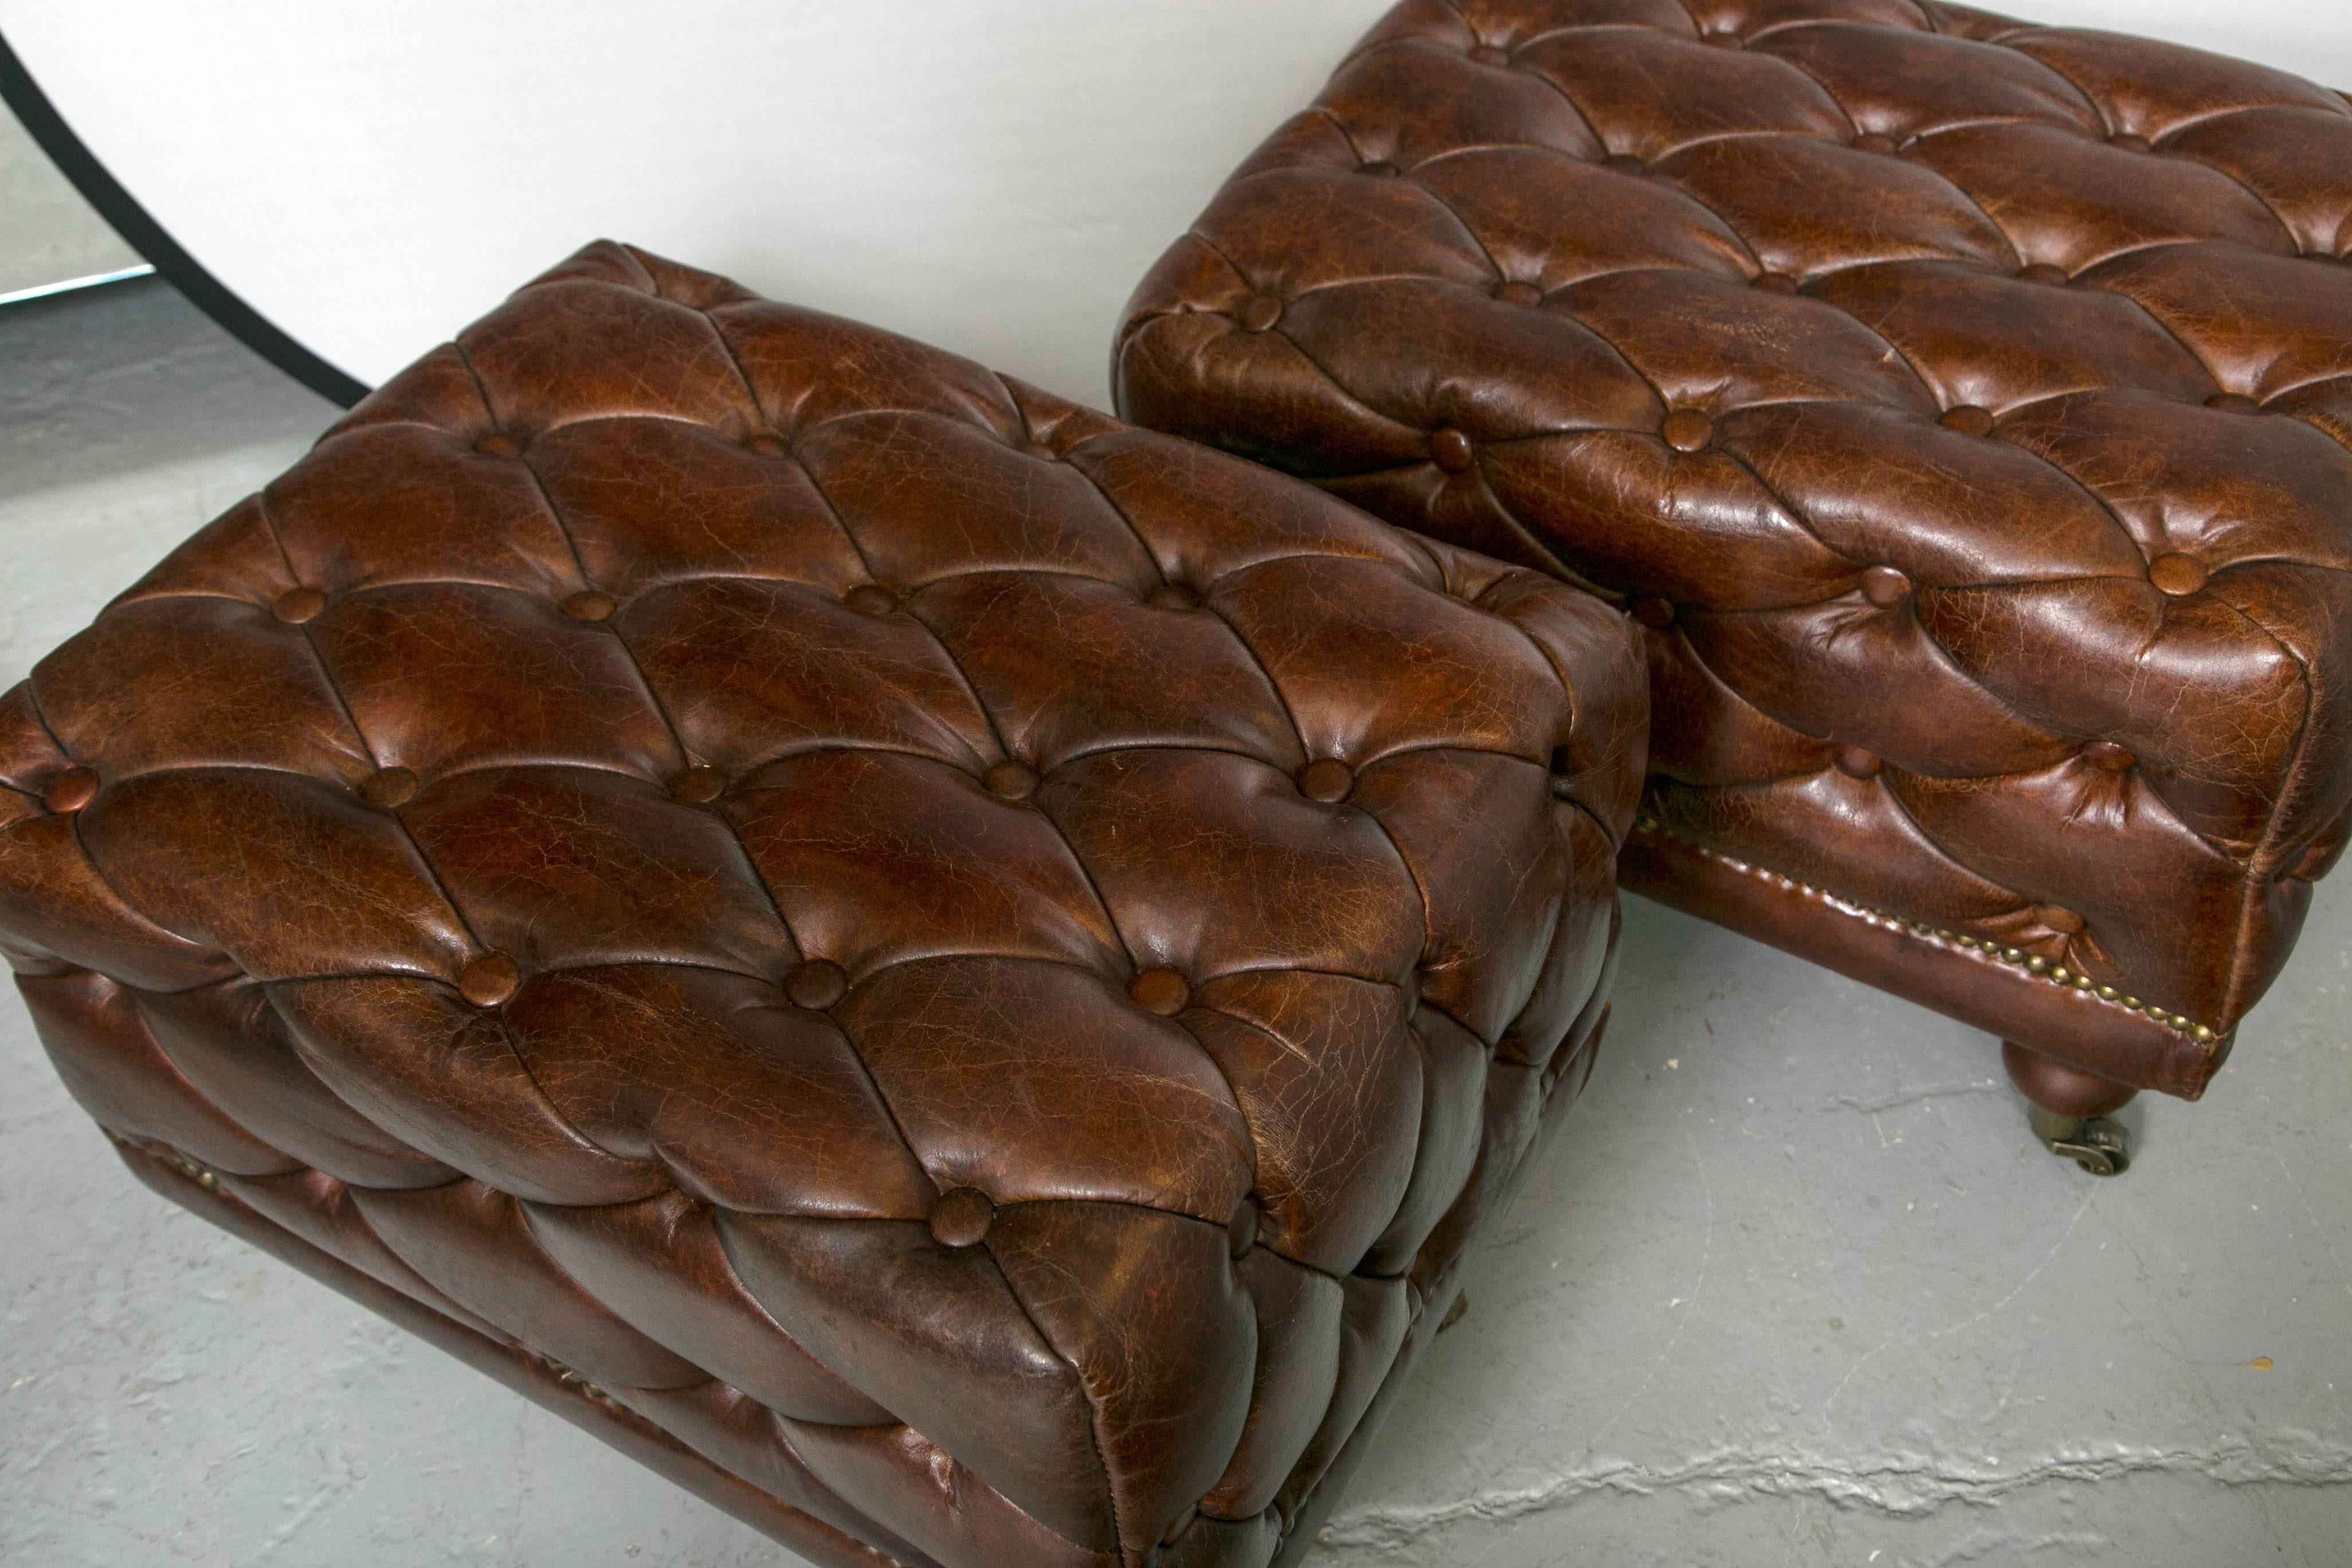 Pair of tufted leather Ottomans possibly by Ralph Lauren. Rectangular stools having tufted brown leather exterior with brass upholstery finishing nails around the base raised on four caster feet. Great leather - fabulous size and style! A hard to